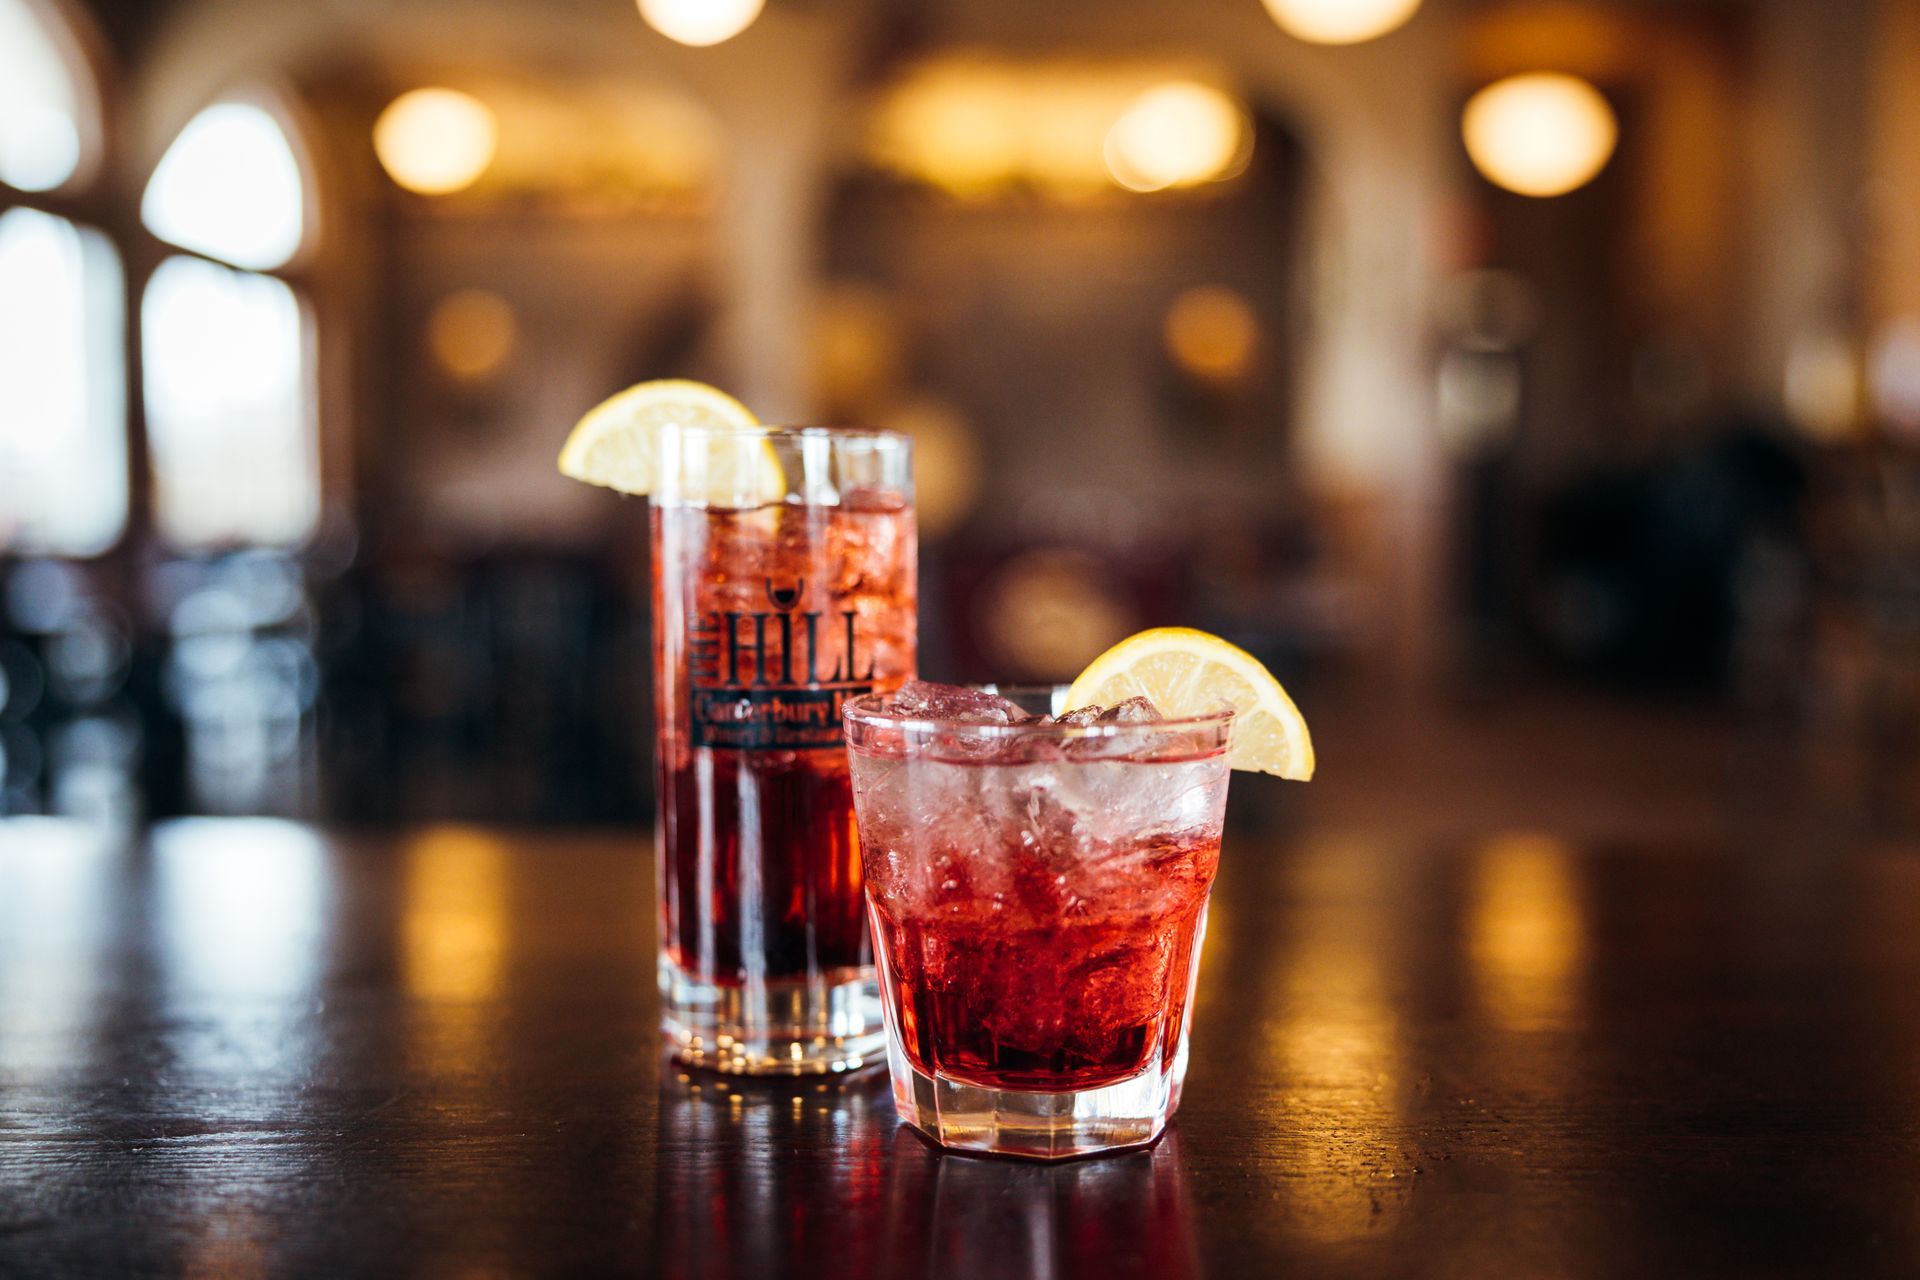 Pair Your Meal at the Hill With One of Our Delicious House-Crafted Cocktails in Holts Summit, MO.